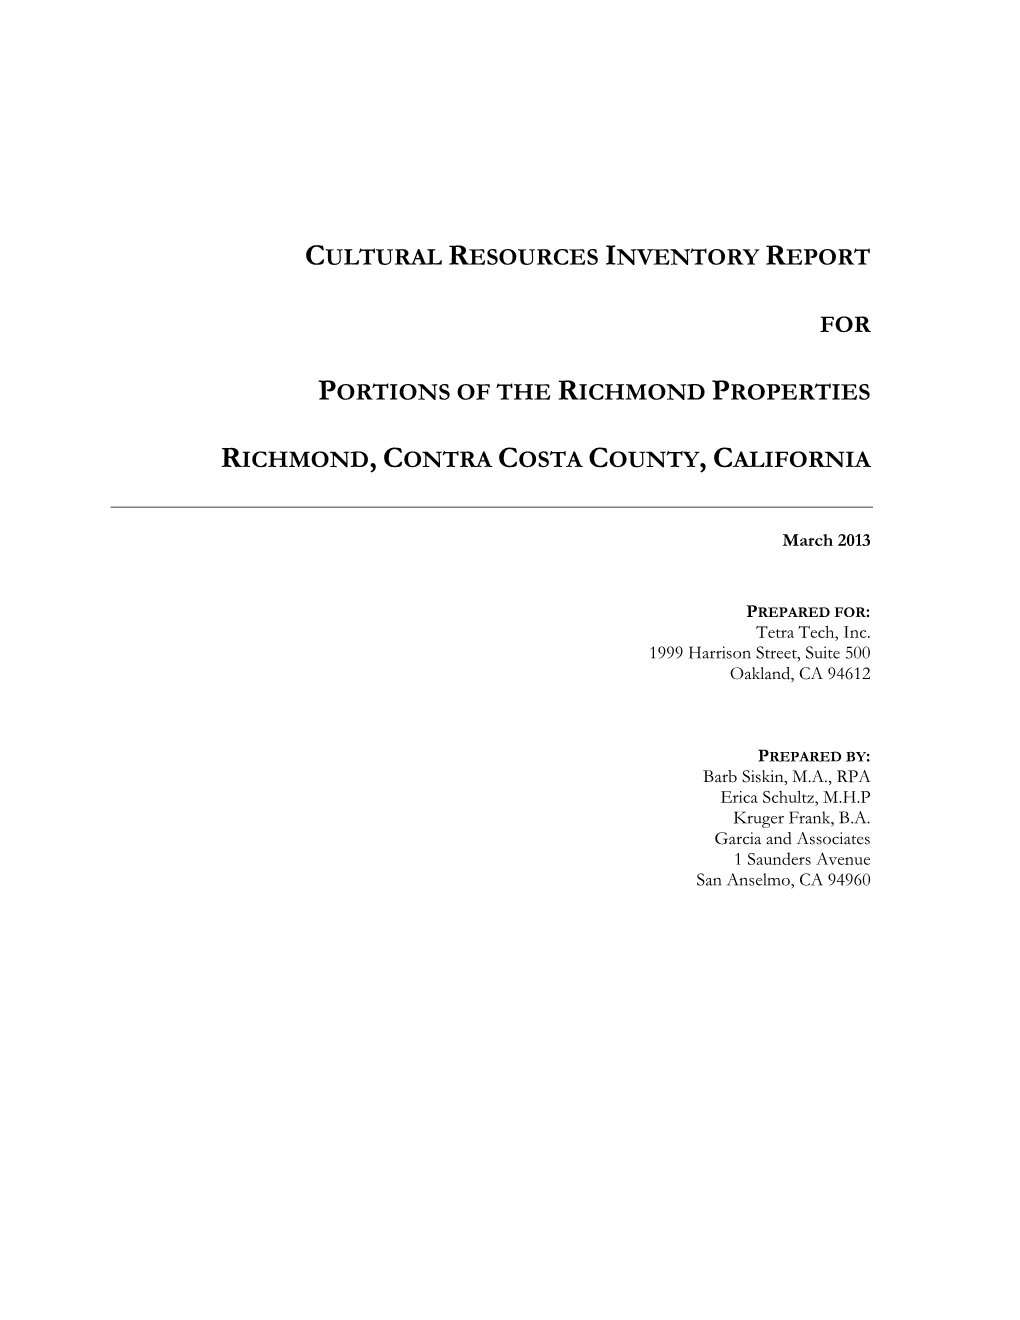 Cultural Resources Inventory Report For